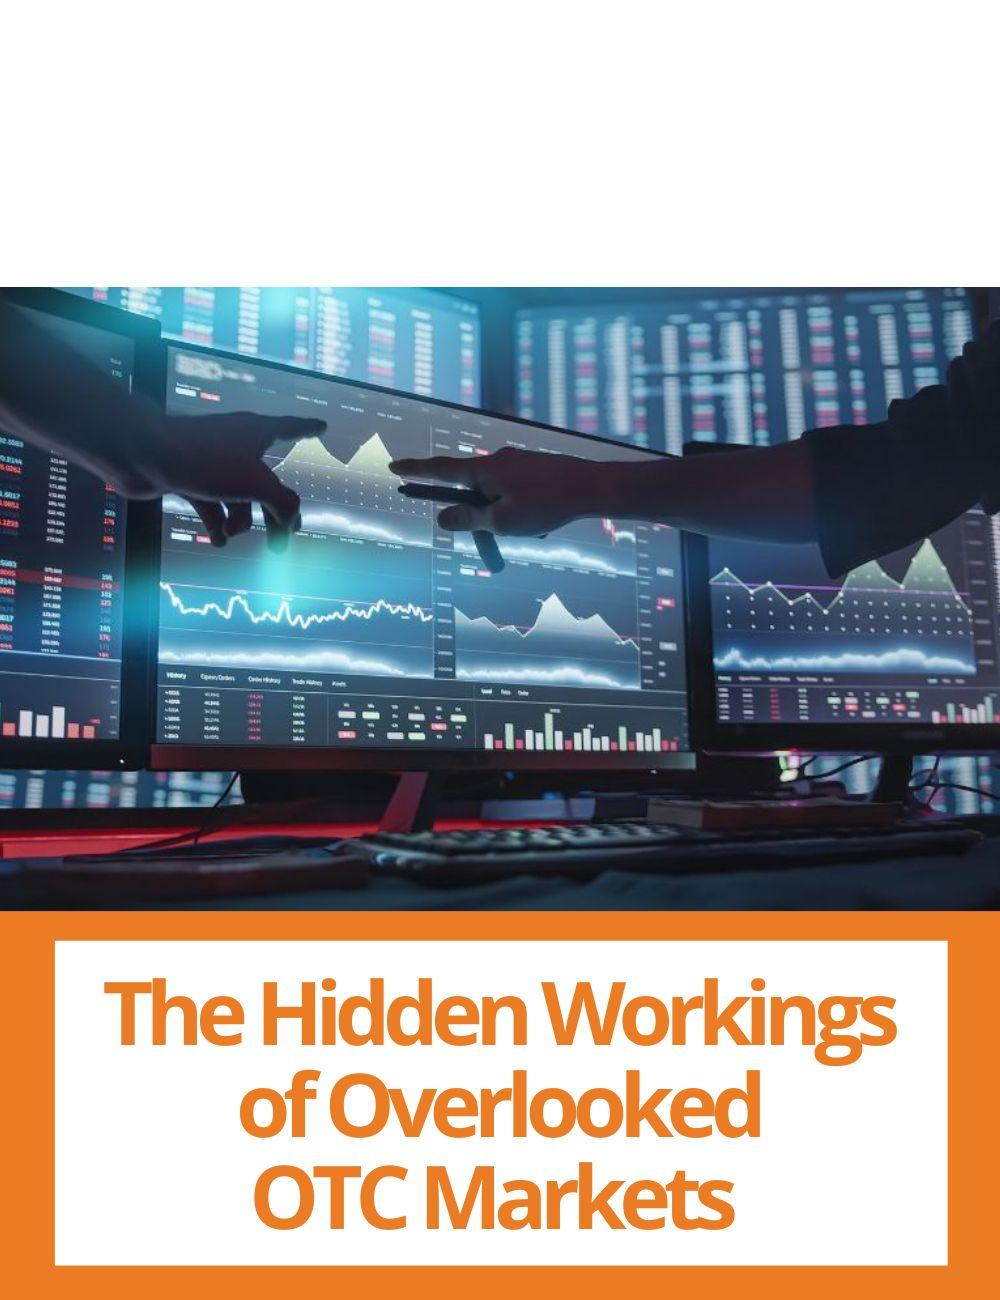 Link to related stories. Image: computers and graphs. Story headline: The Hidden Workings of Overlooked OTC Markets